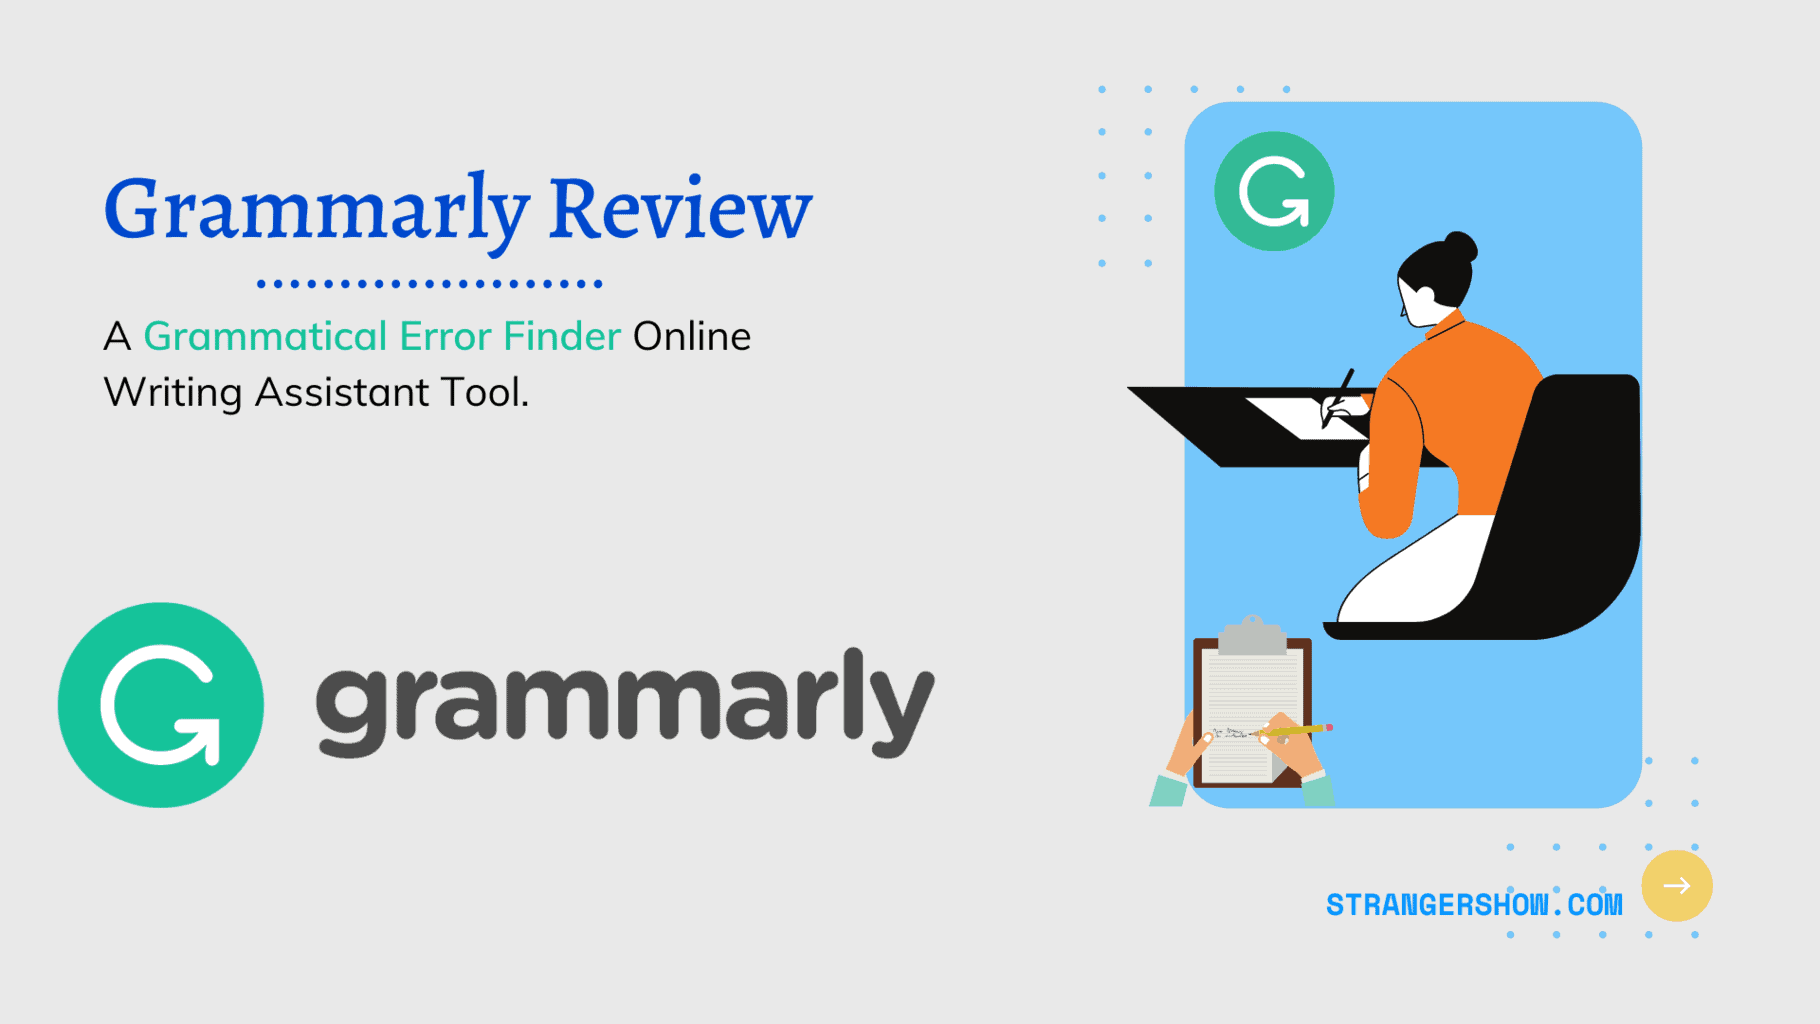 grammarly is not free